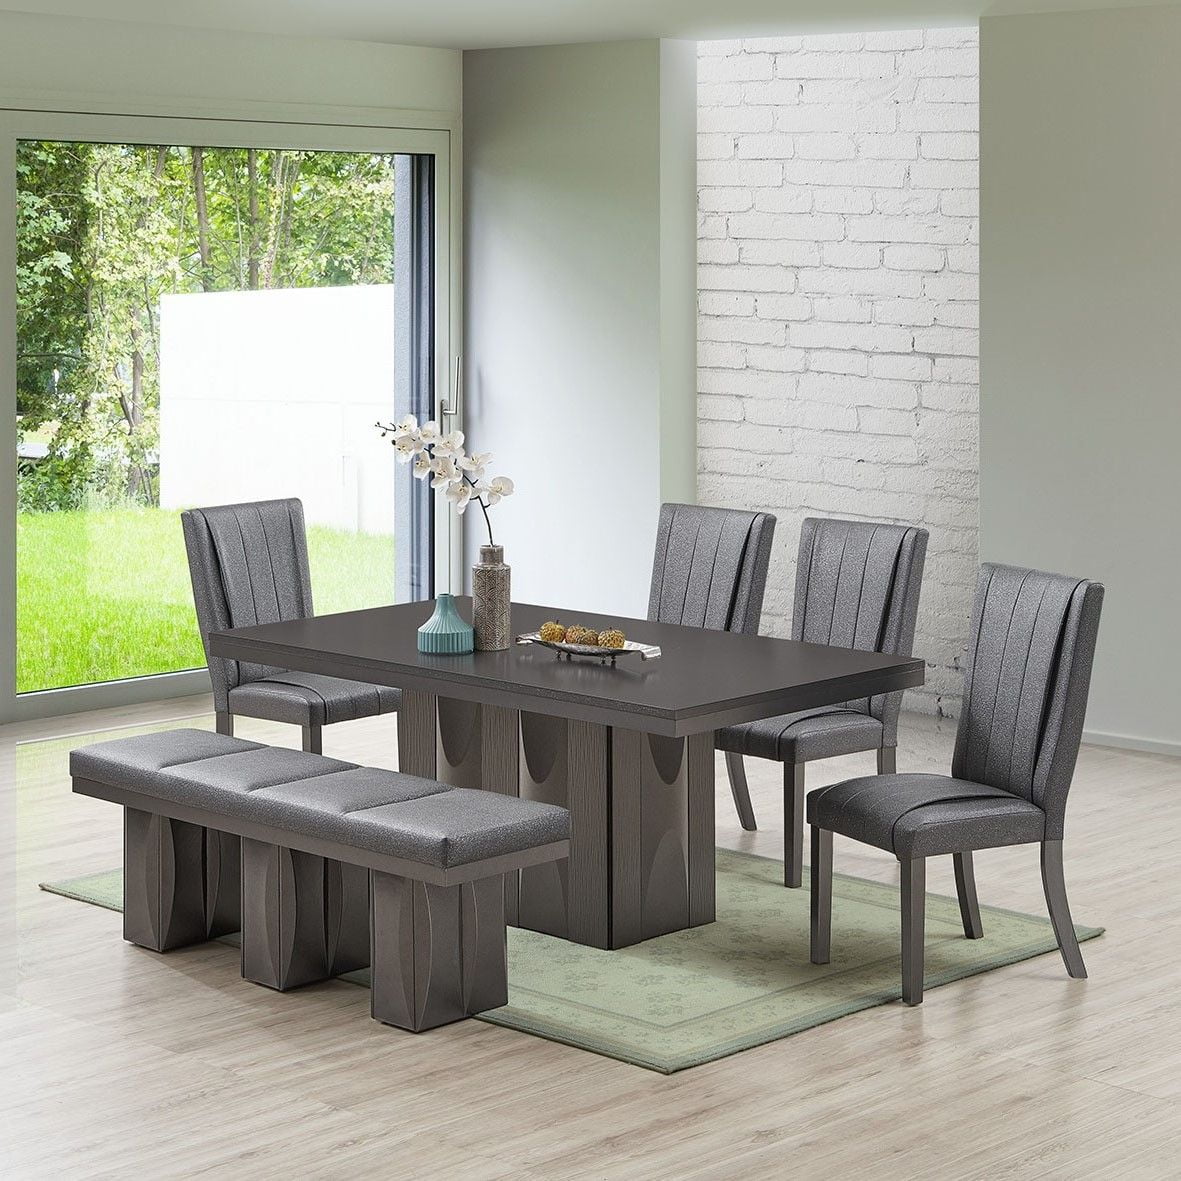 Voight 6 Piece Dining Set Gray Wood, Bernie And Phyls Dining Room Sets